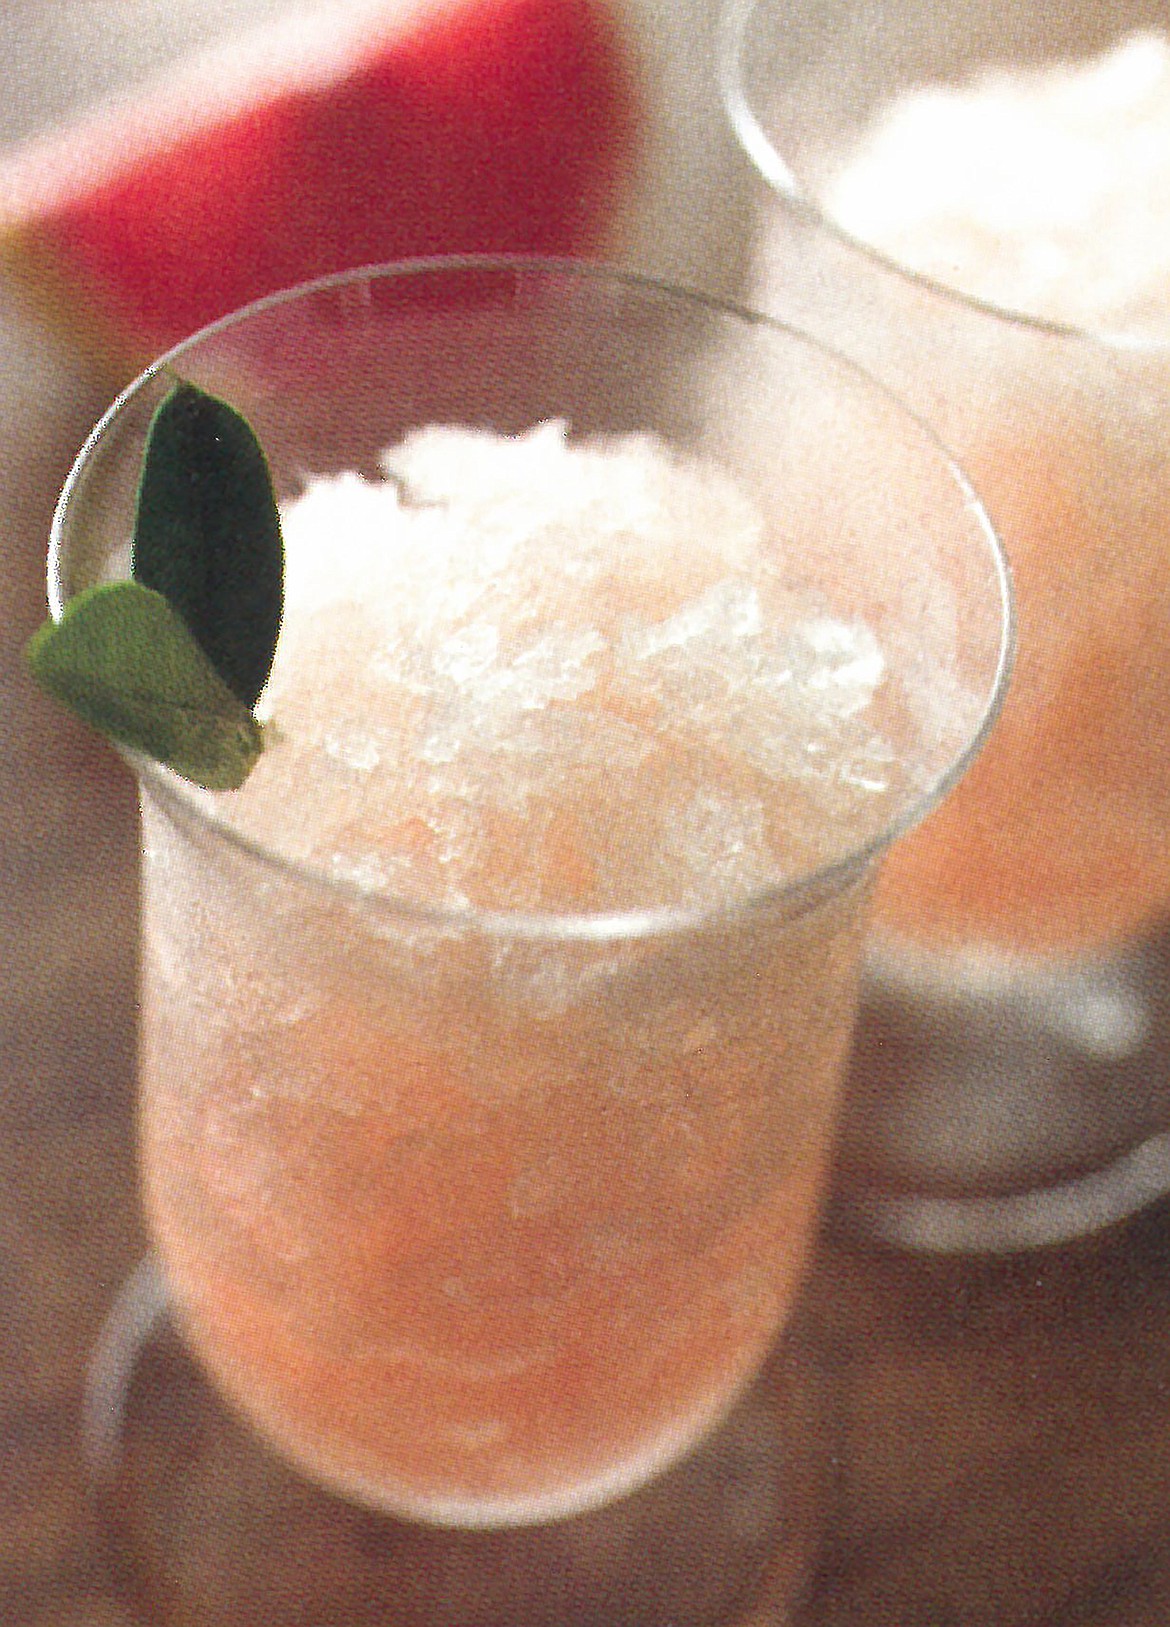 Prosecco adds a bubbly twist to watermelon for a delightful summer drink.